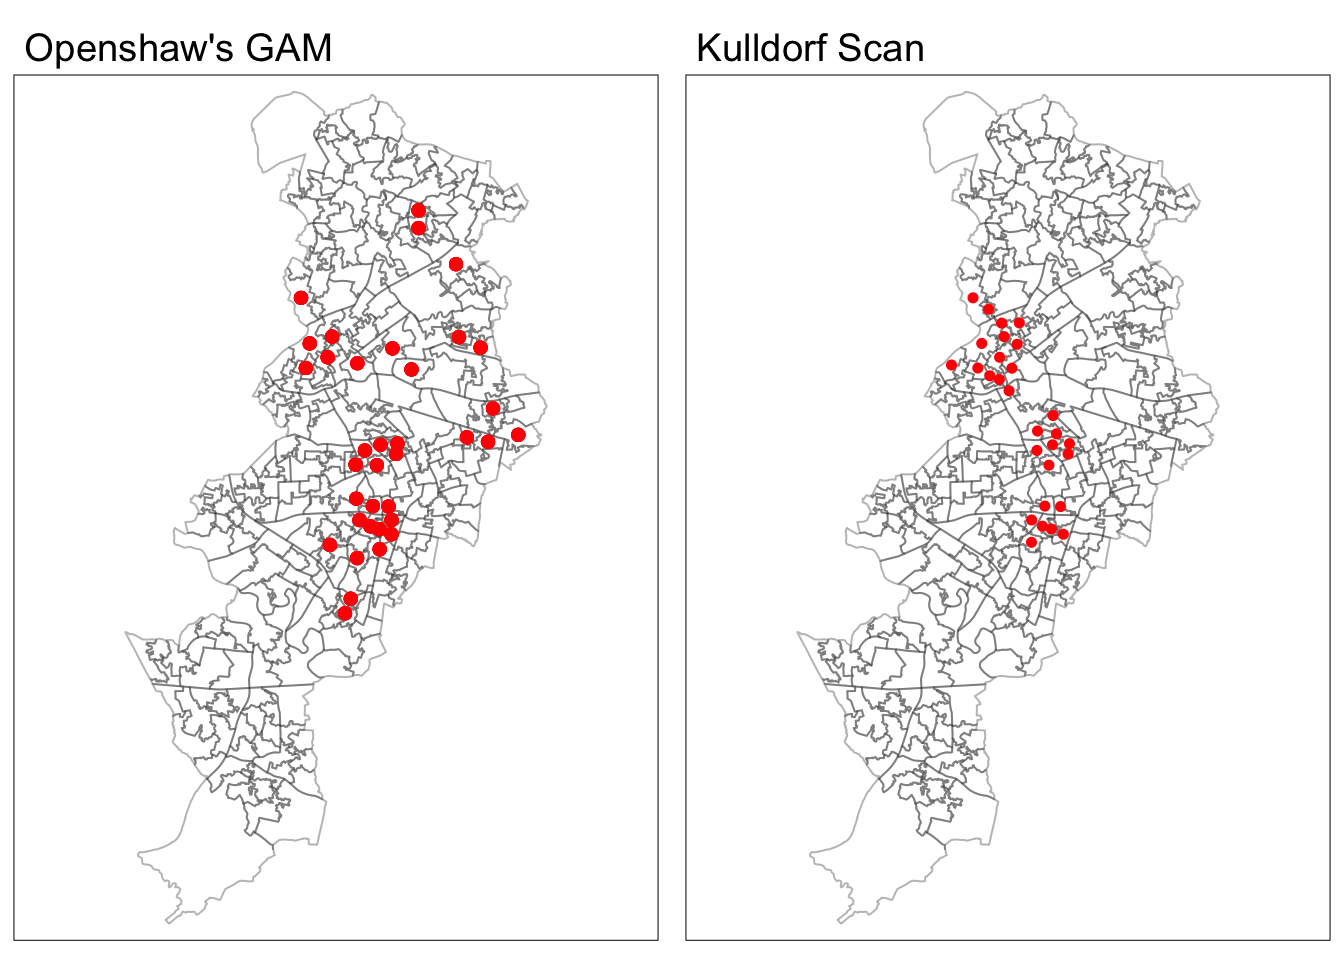 Two side-by-side featureless maps of Manchester broken into LSOAs, one titled 'Openshaw's GAM', and the other 'Kulldorf Scan'. Both have red dots in some of the LSOAs. The map on the right, 'Kulldorf Scan', shows three clear clusters of red, one around the city centre, one slightly southeast, and one more further south. The left map, 'Openshaw's GAM', also has similar clusters to these, but also includes red dots further south, and some smaller clusters further east.